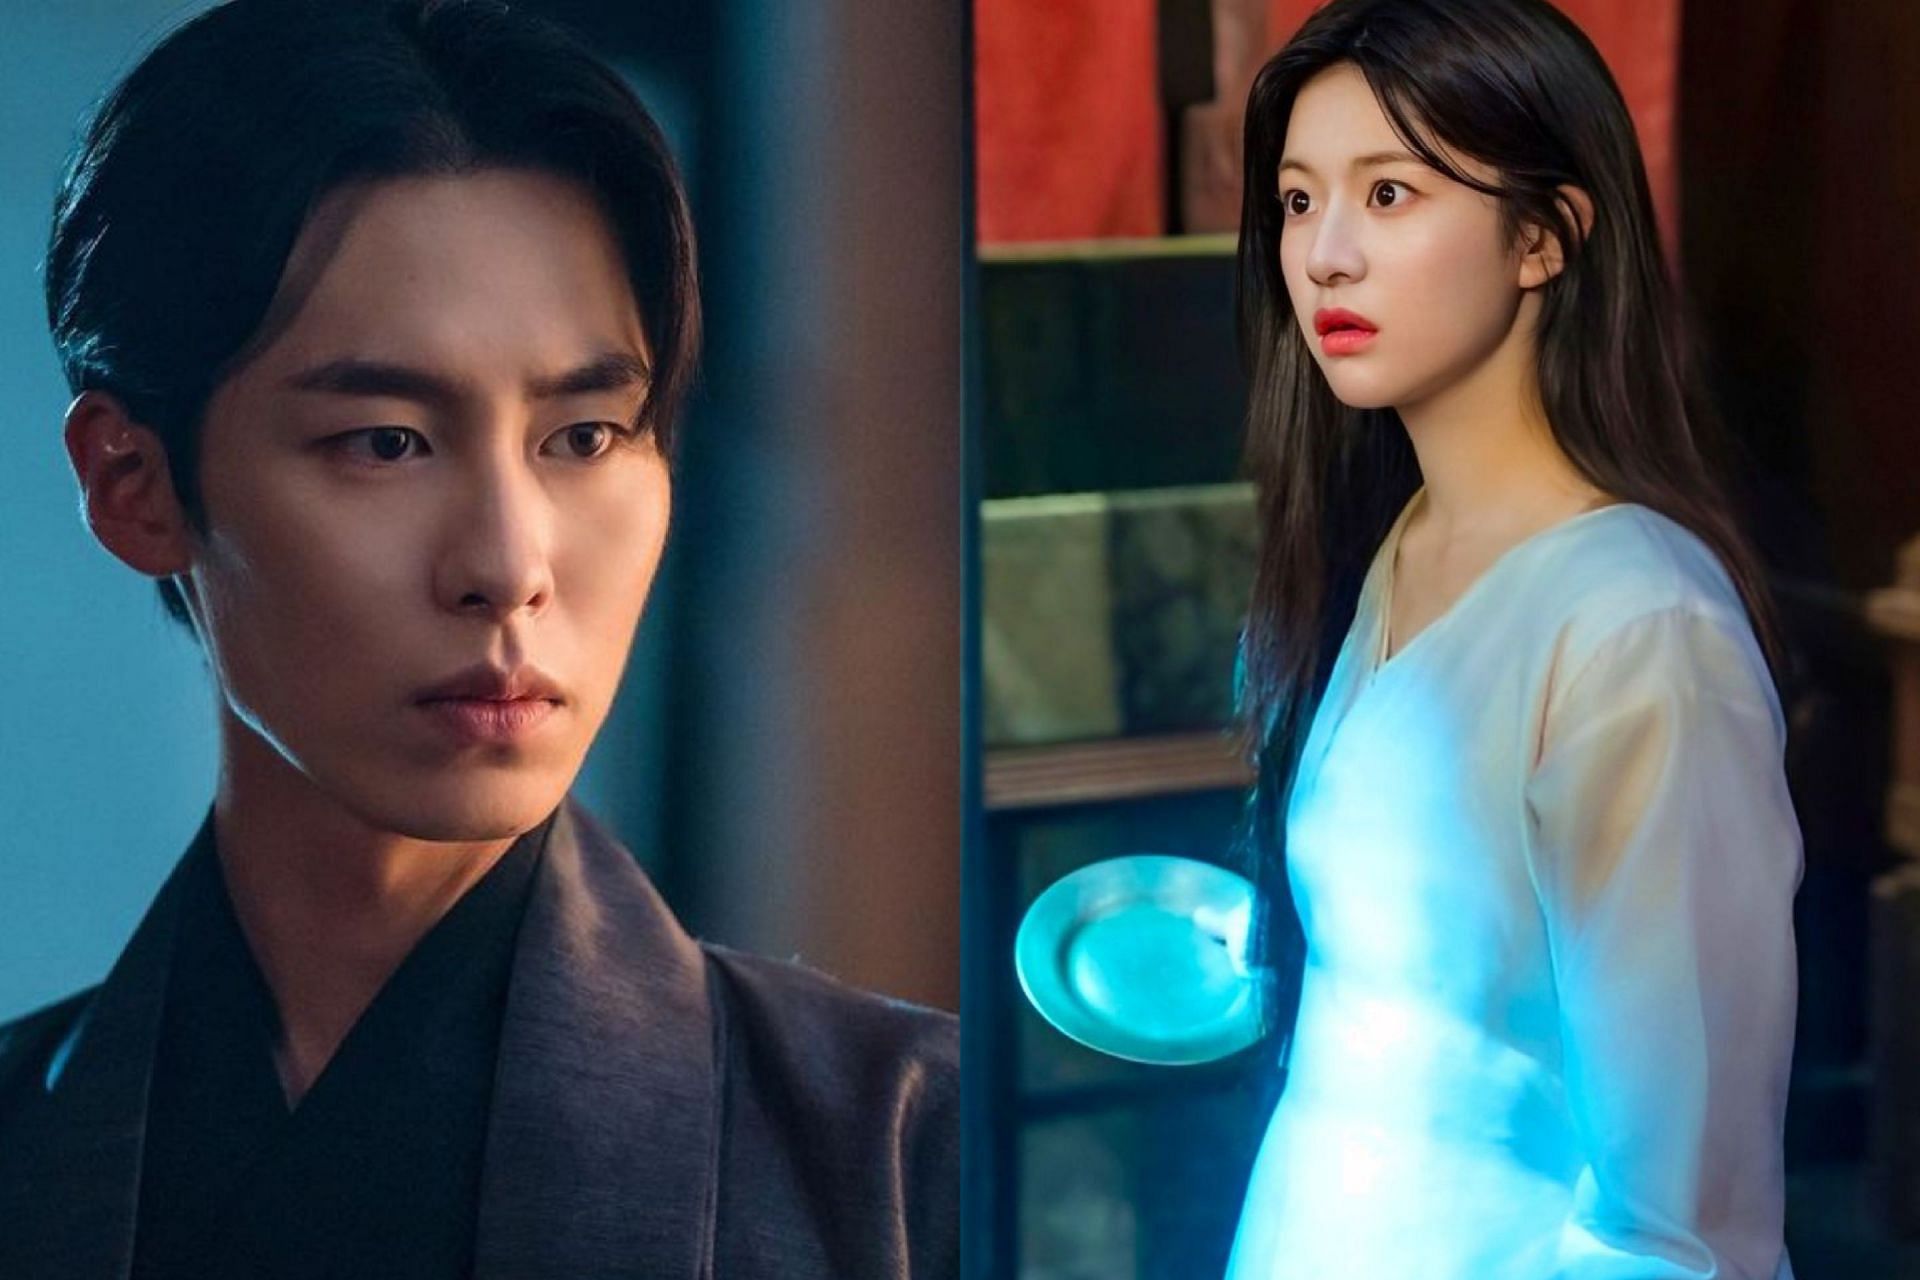 Alchemy of Souls 2 featuring Lee Jae-wook and Go Yoon-jung (Image via tvN)